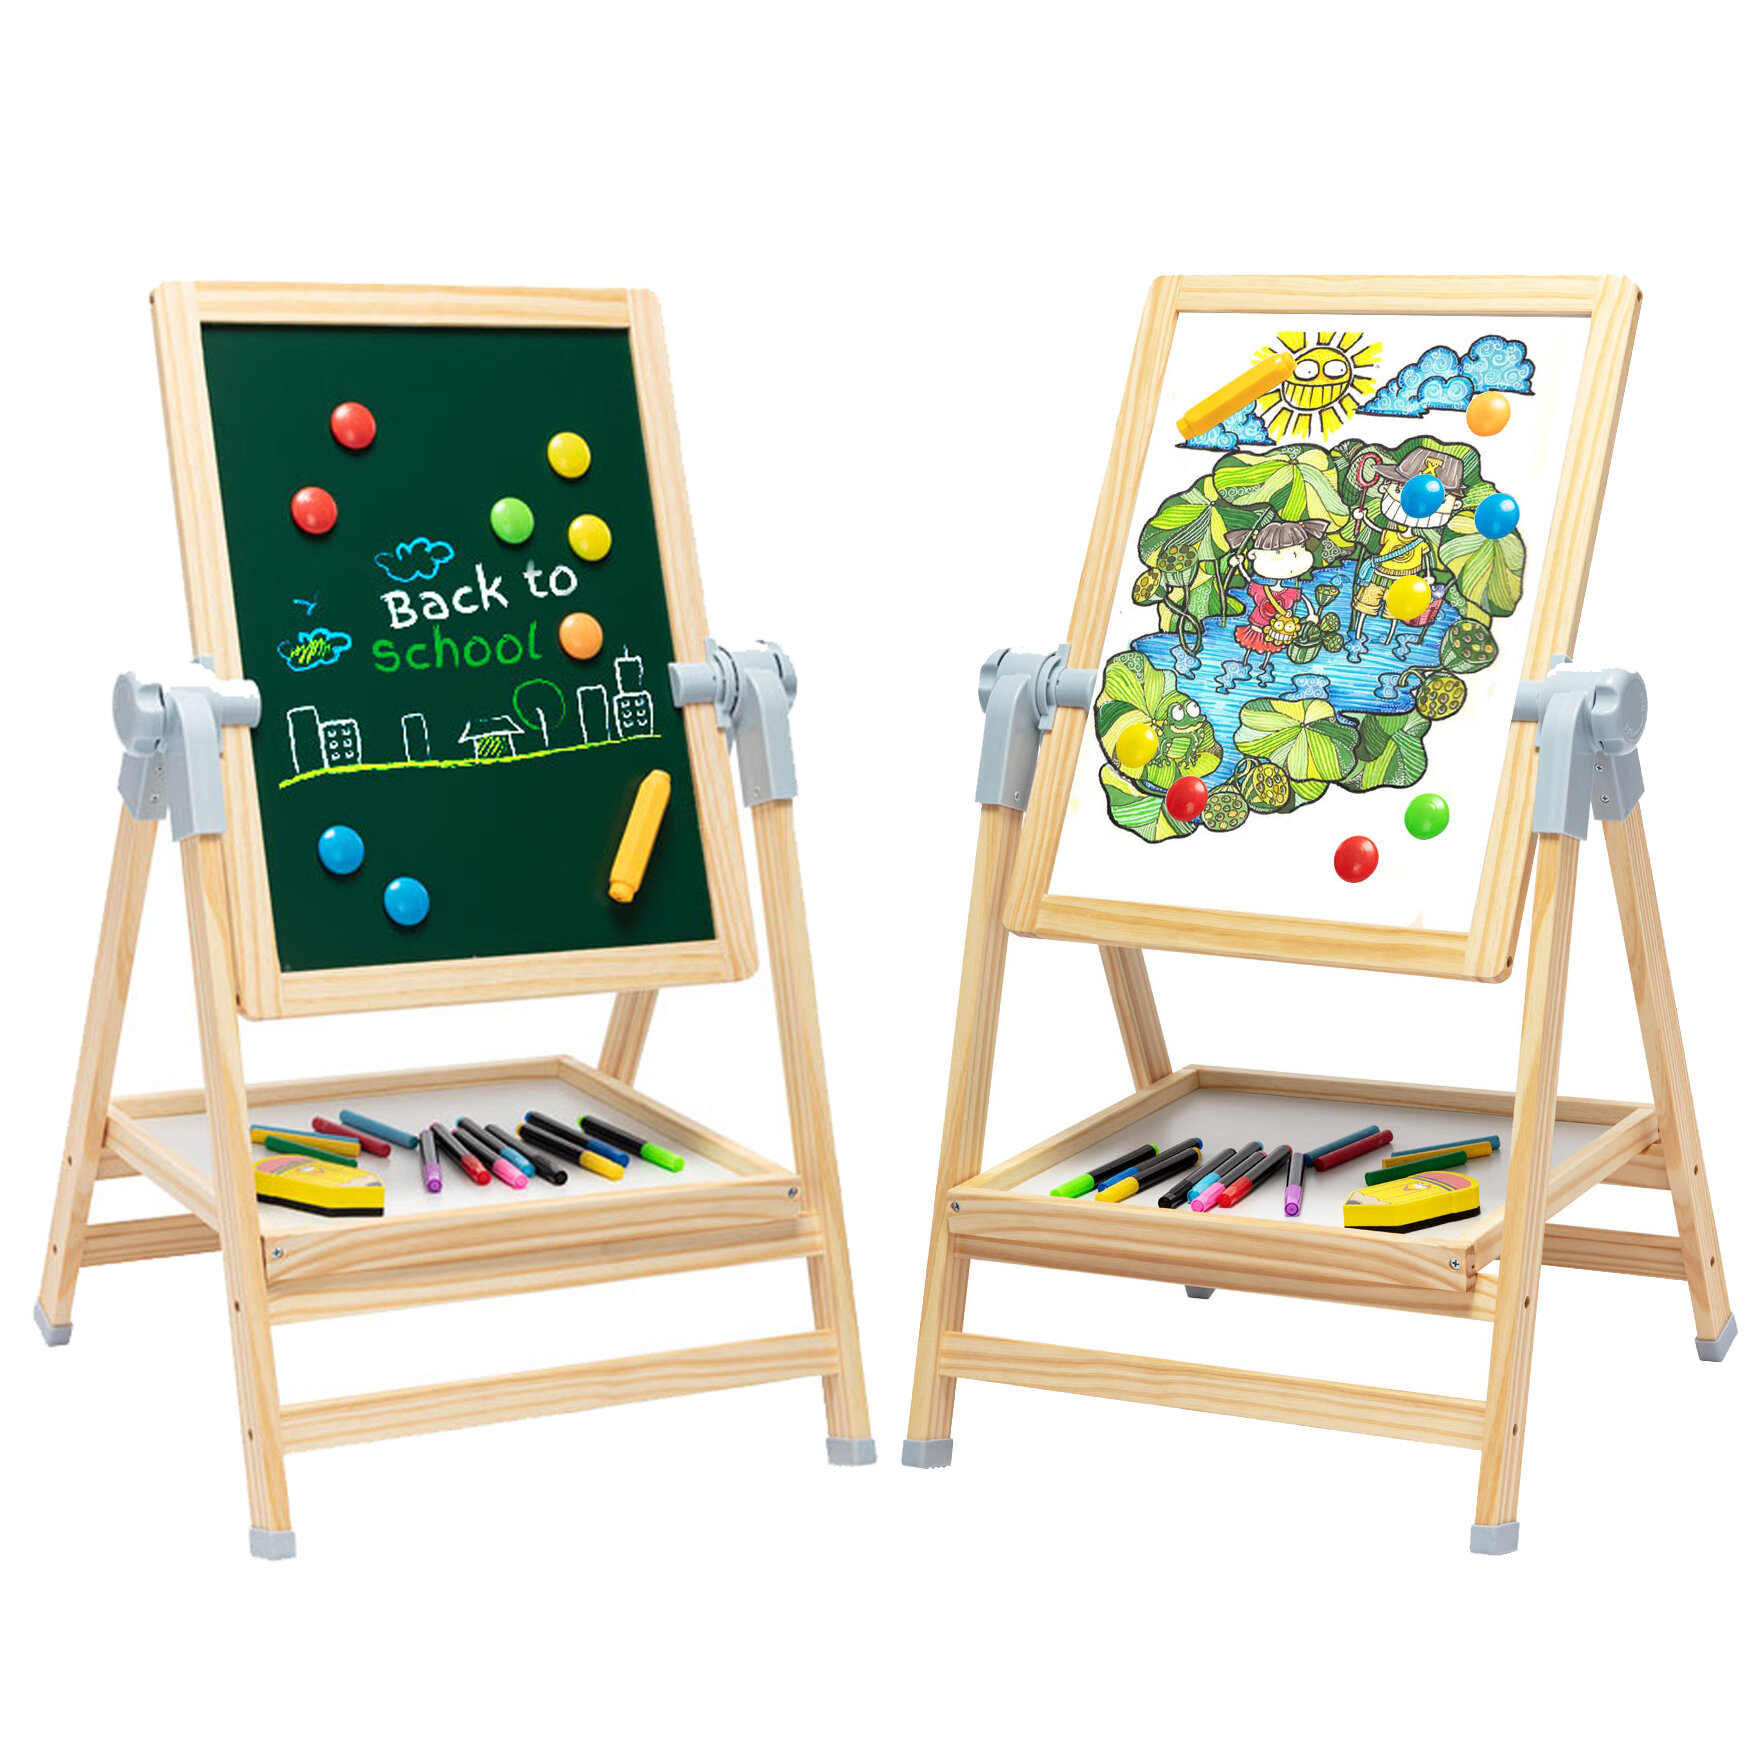 from US, Blue Kids Magnetic Easel 4 in 1 Standing Toddler Art Easels Deluxe Whiteboard & Chalkboard with Accessories for Kids Painting Drawing 